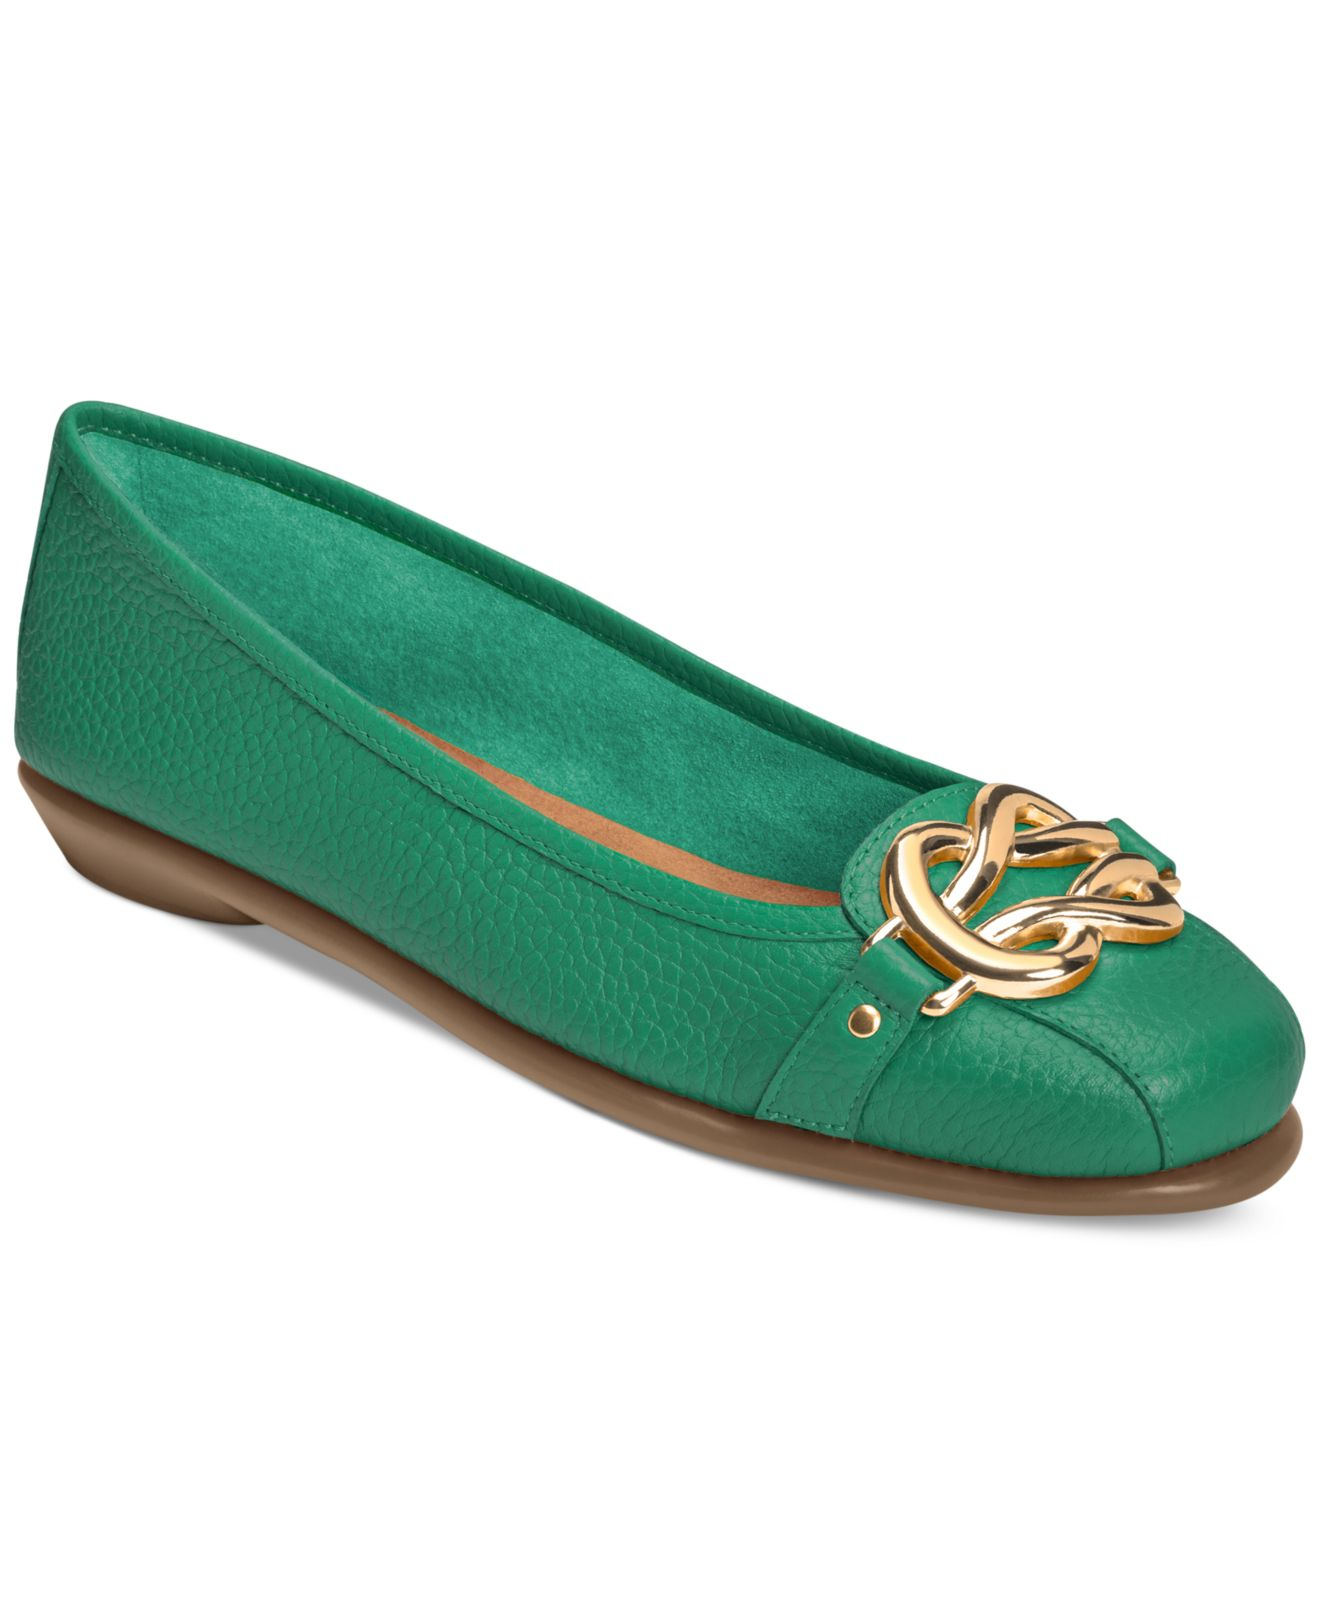 green leather flat shoes